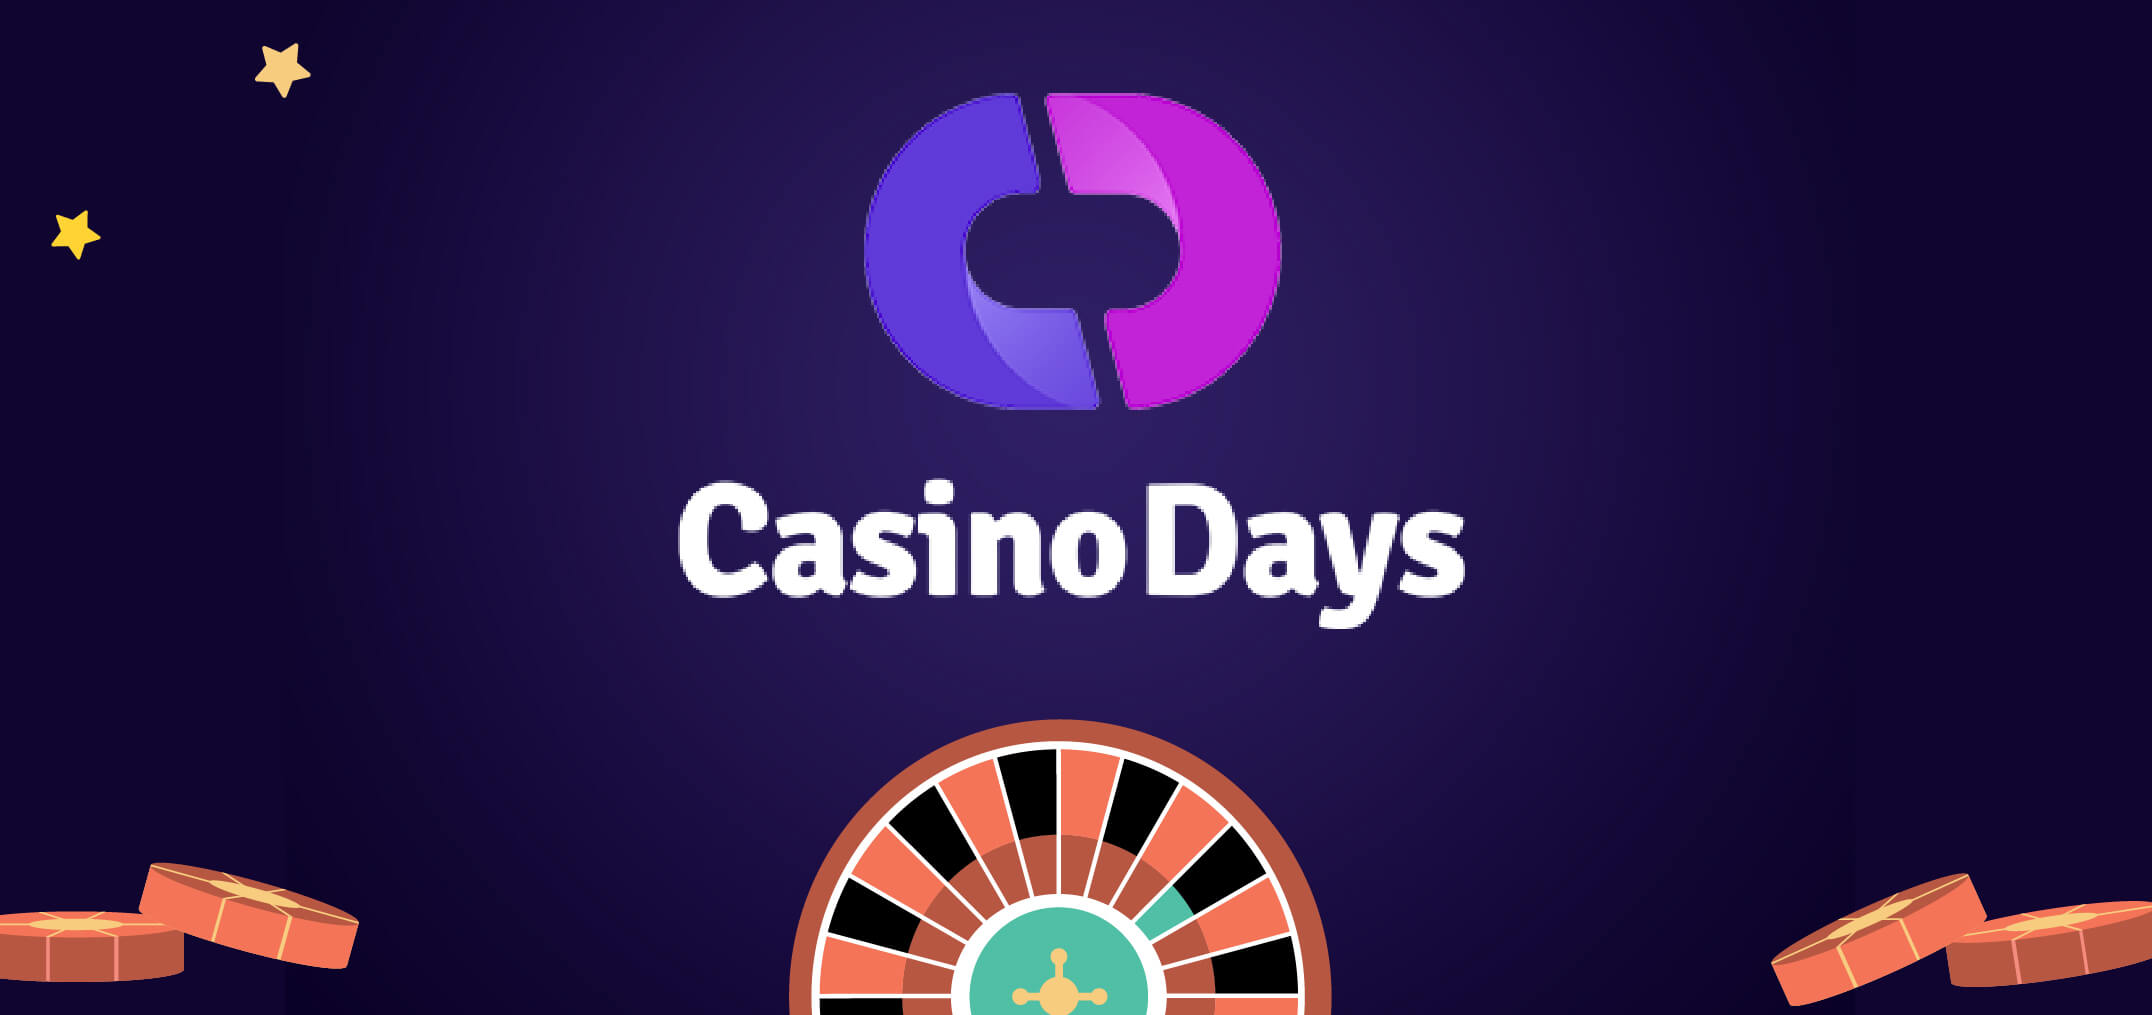 Common information about Casino Days